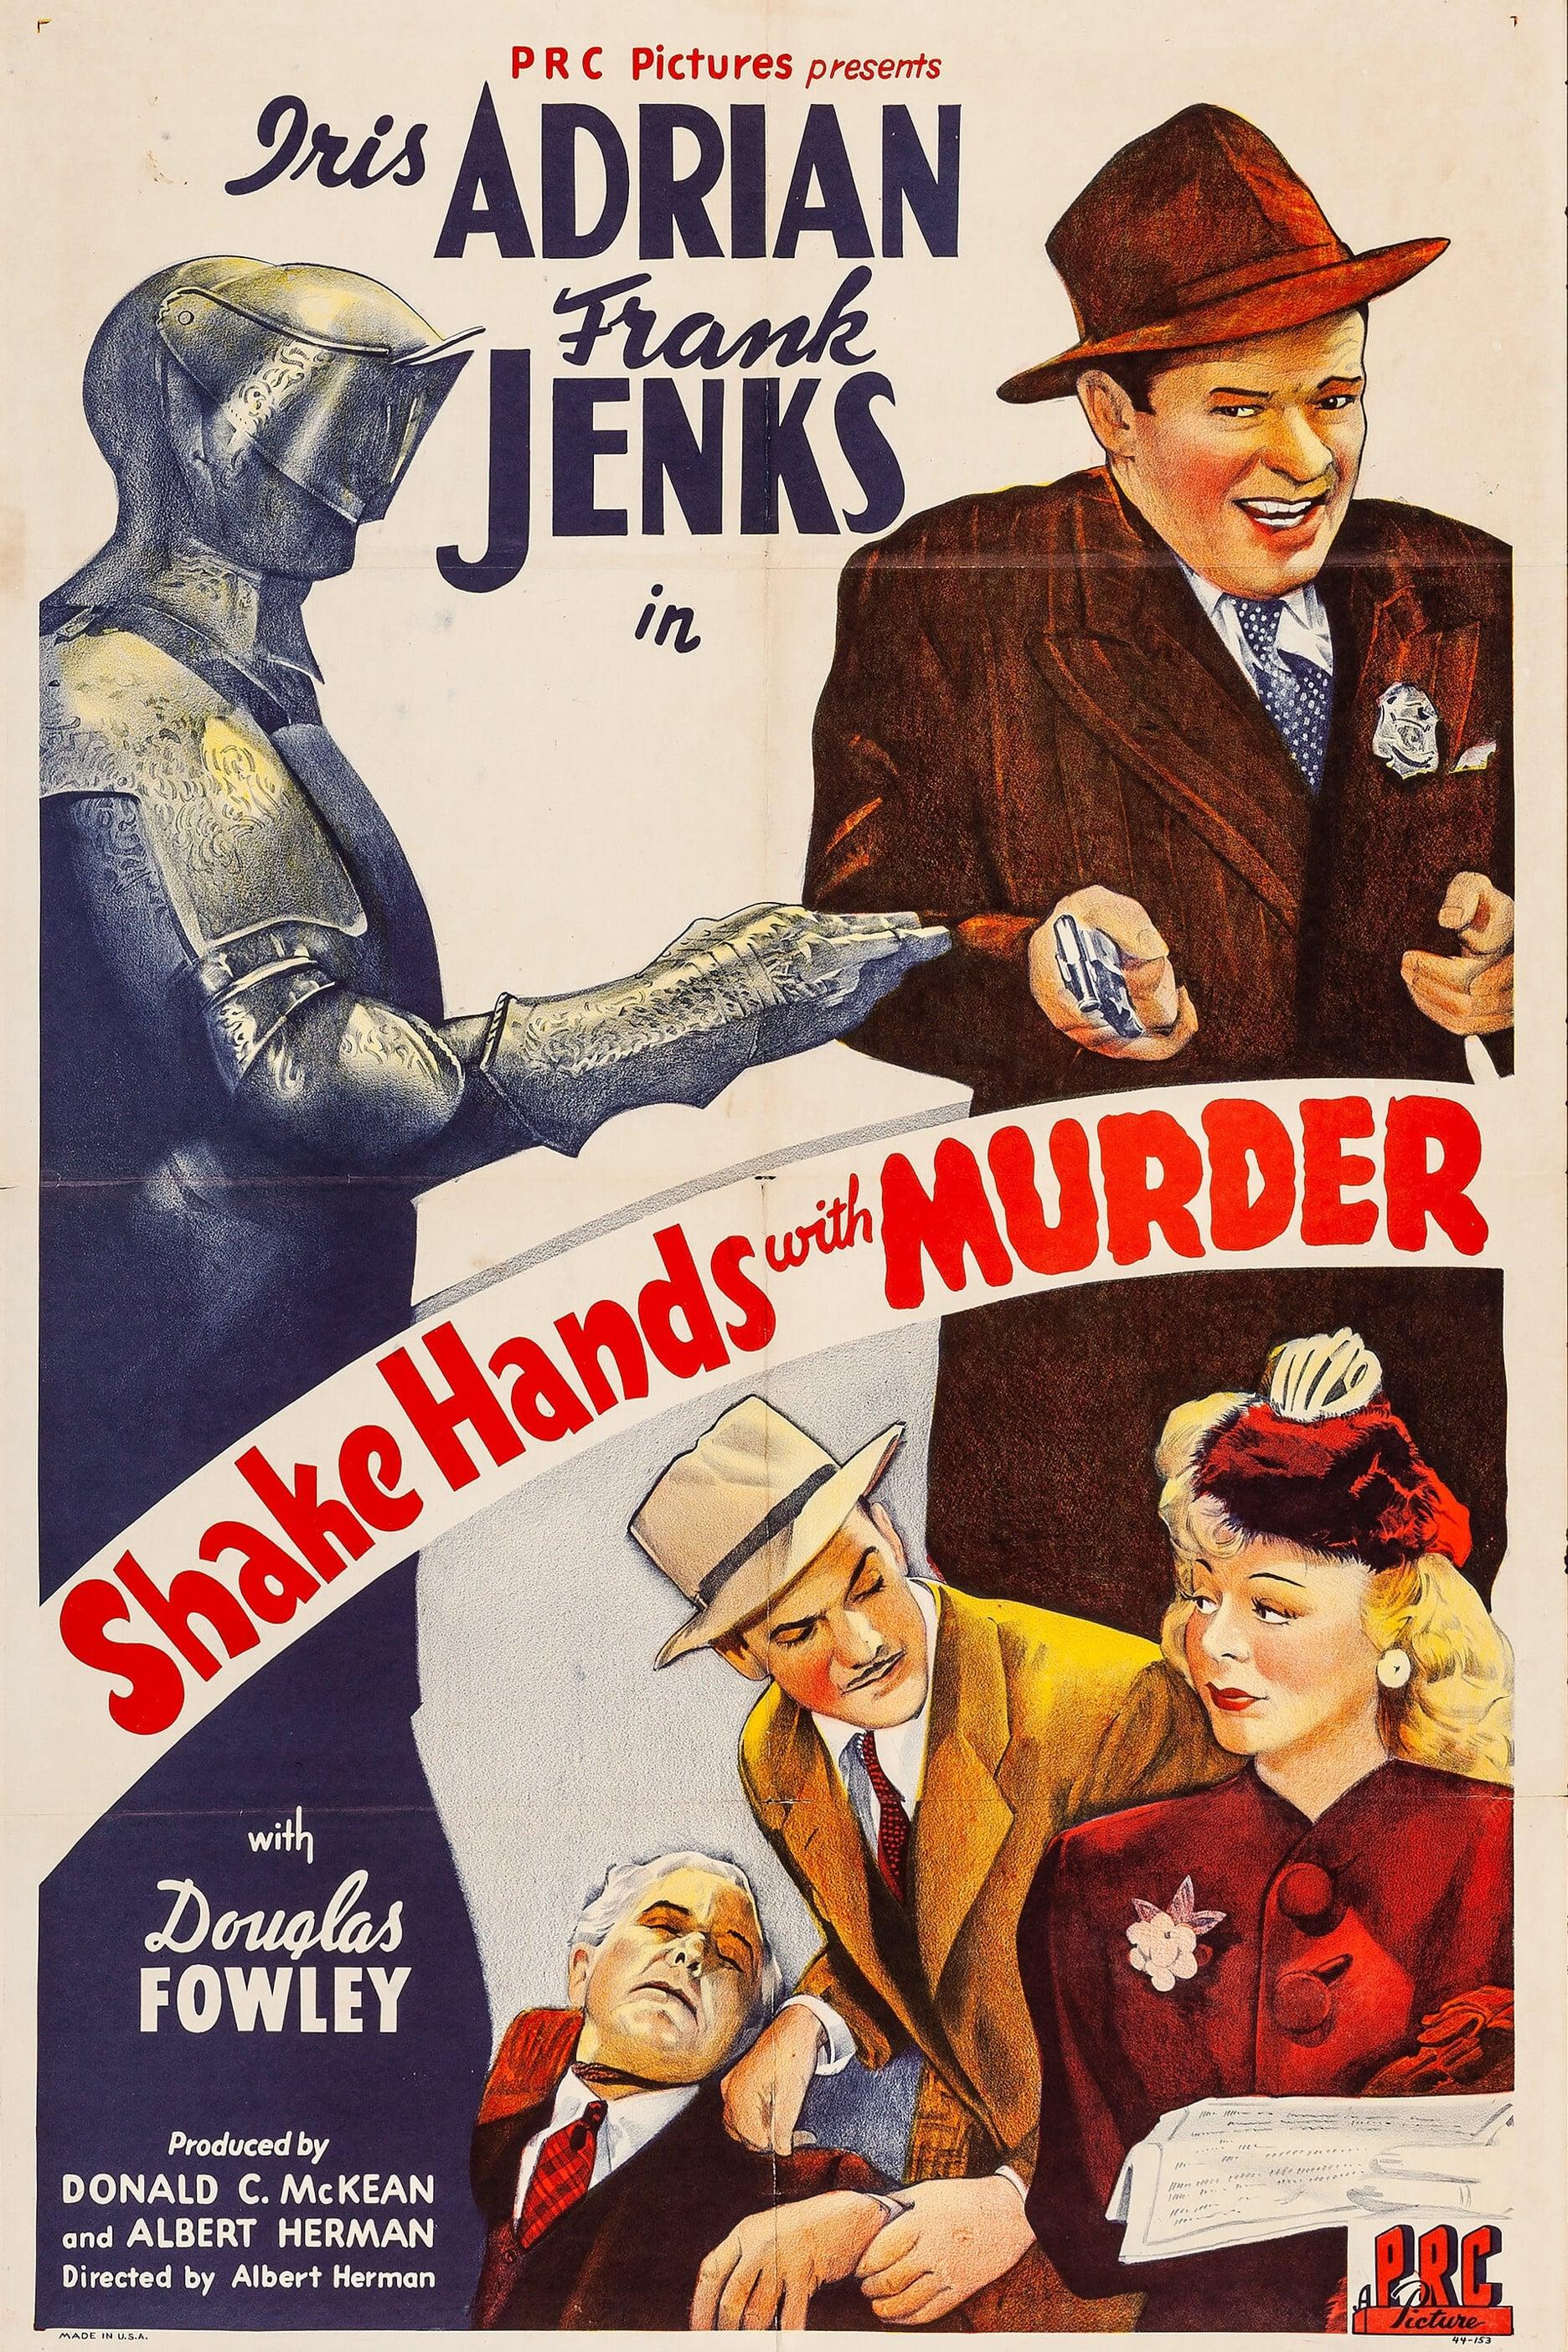 Shake Hands with Murder poster